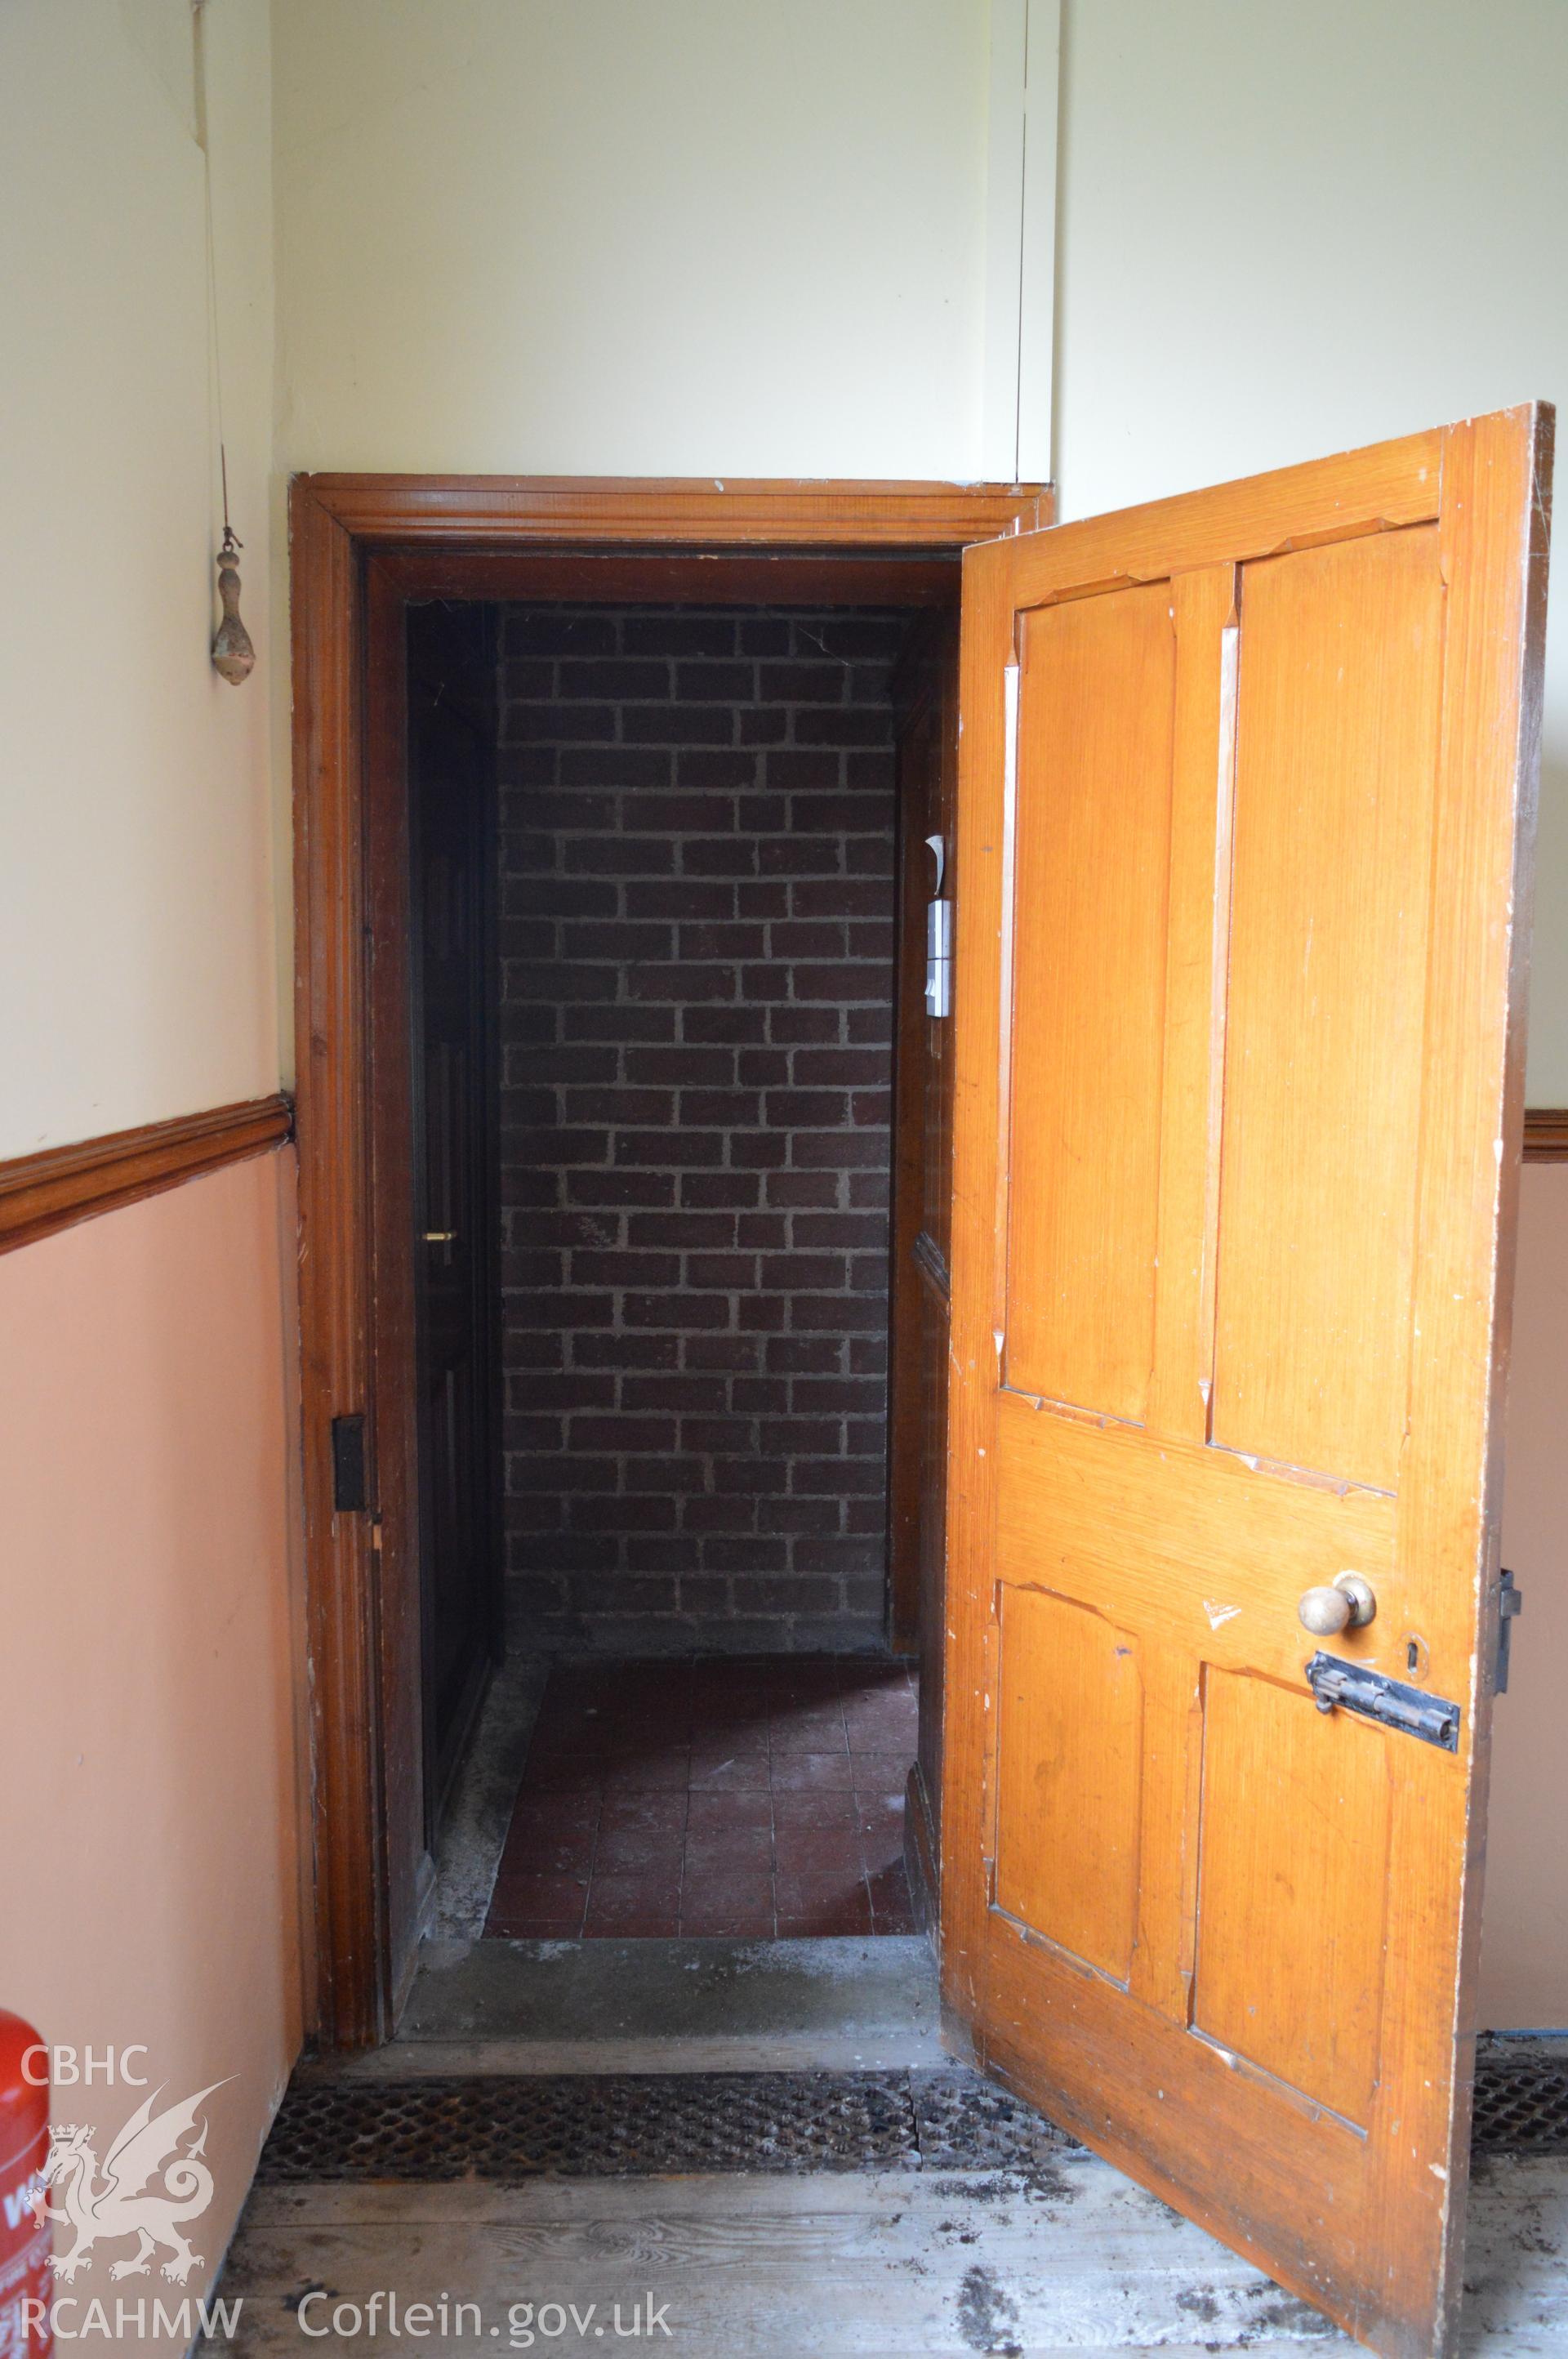 Internal view down the passage from the eastern room to the kitchen. Digital colour photograph taken during CPAT Project 2396 at the United Reformed Church in Northop. Prepared by Clwyd Powys Archaeological Trust, 2018-2019.